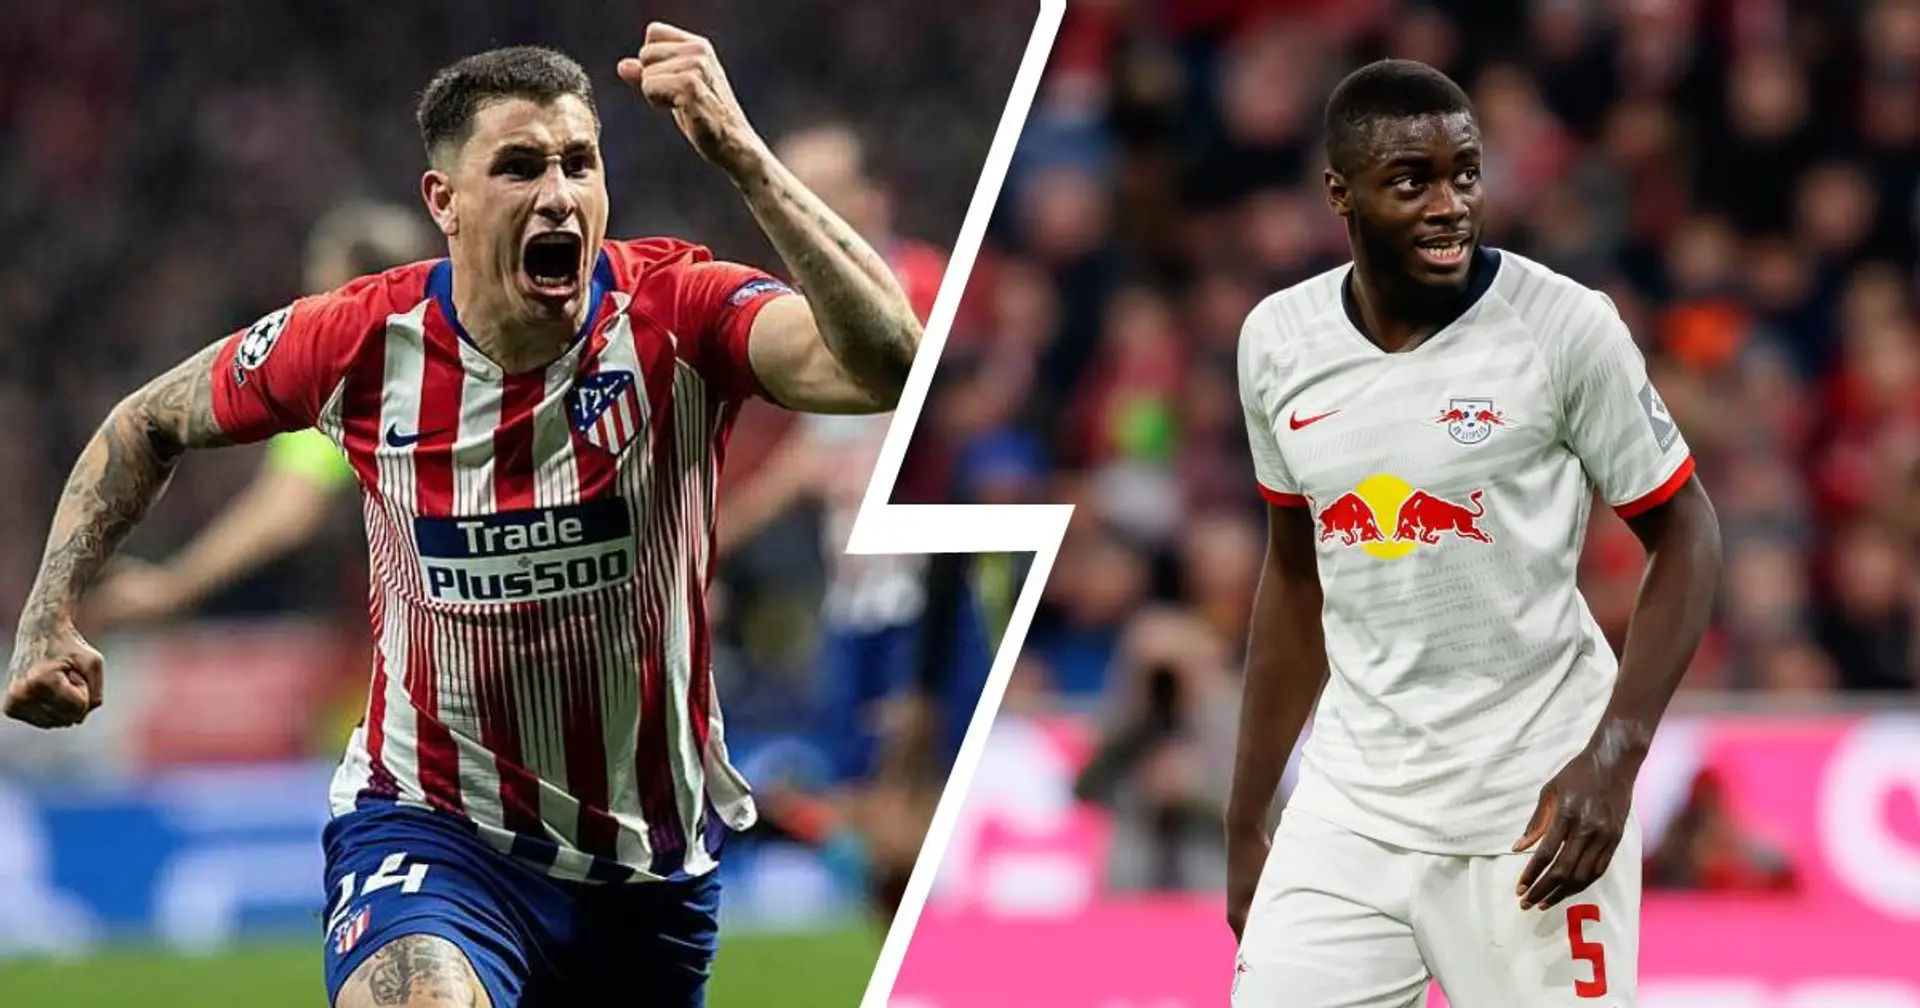 💪 Atletico's warrior, Leipzig's gem and one more: 3 centre-backs who could improve Liverpool next season